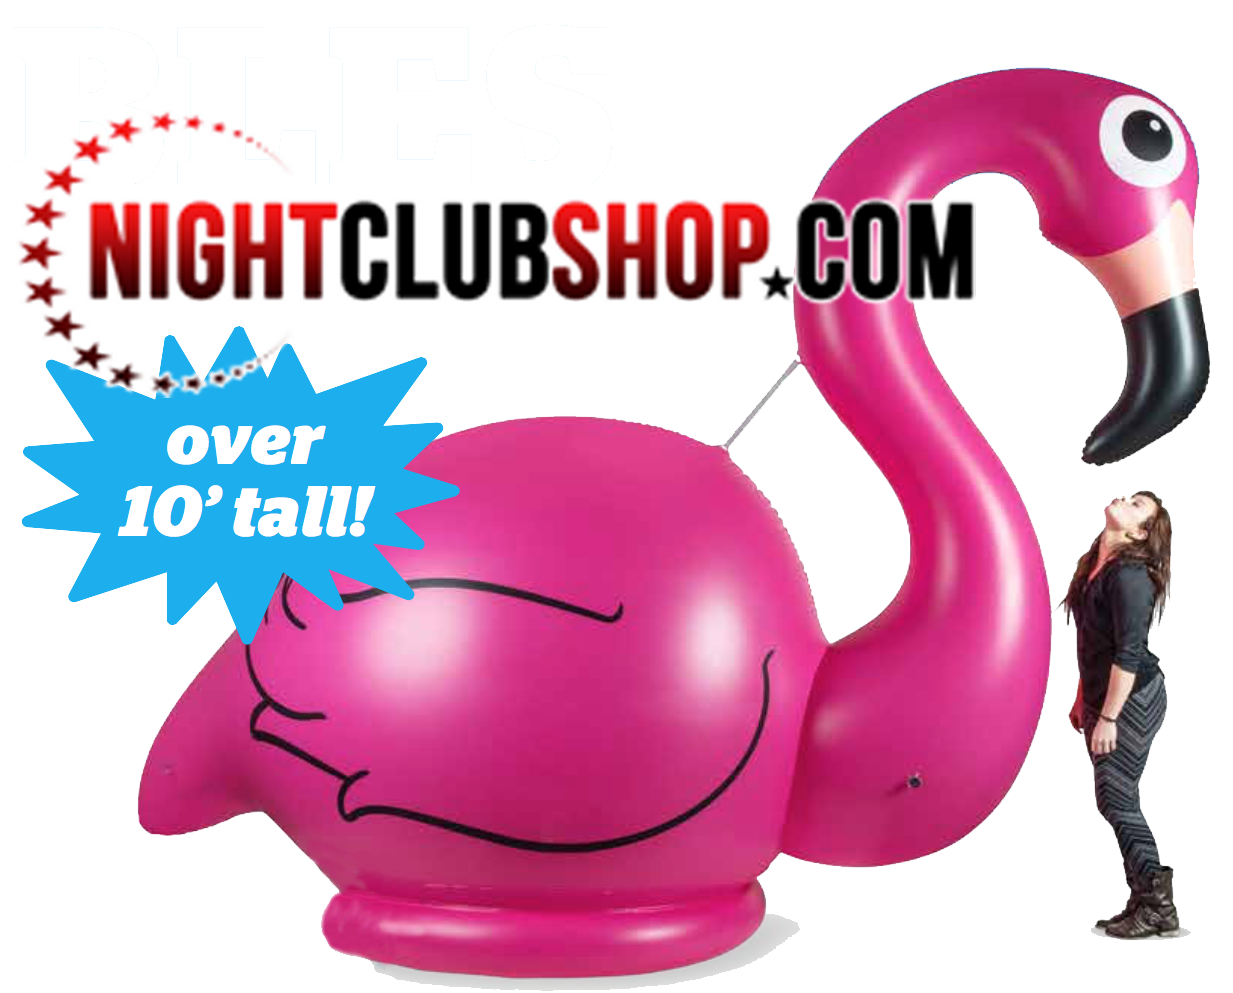 inflatable-giant-blow-up-flamingo-pool-beach-float-miami-xl-15-foot-feet-nightclubshop.png